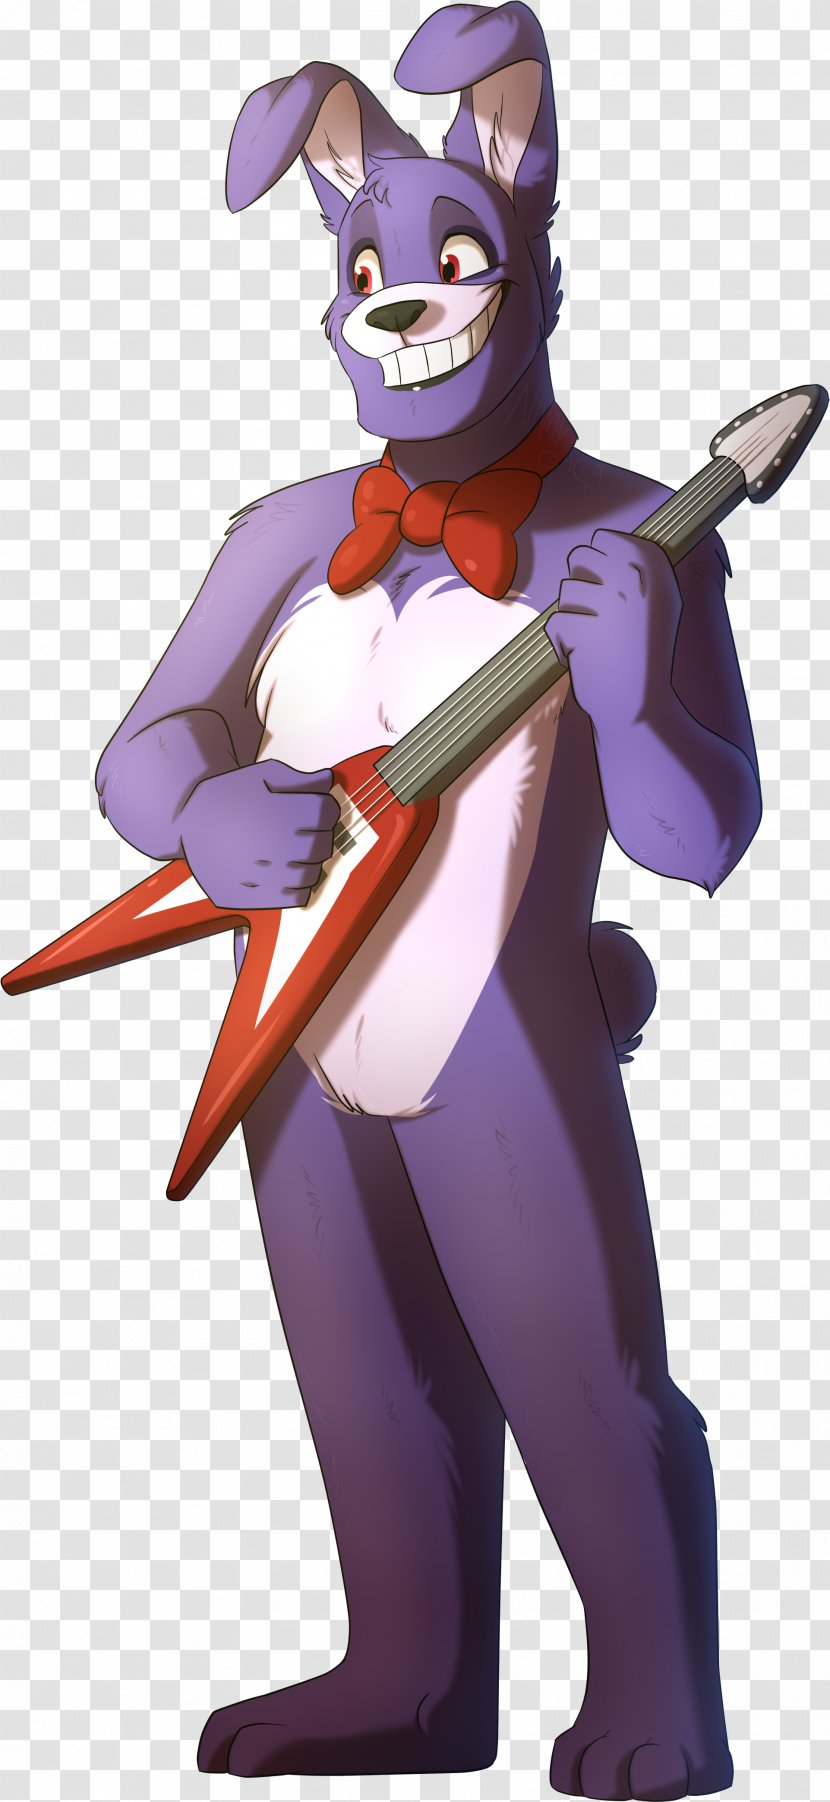 Five Nights At Freddy's 2 Freddy's: Sister Location The Twisted Ones Art Drawing - Joker Transparent PNG